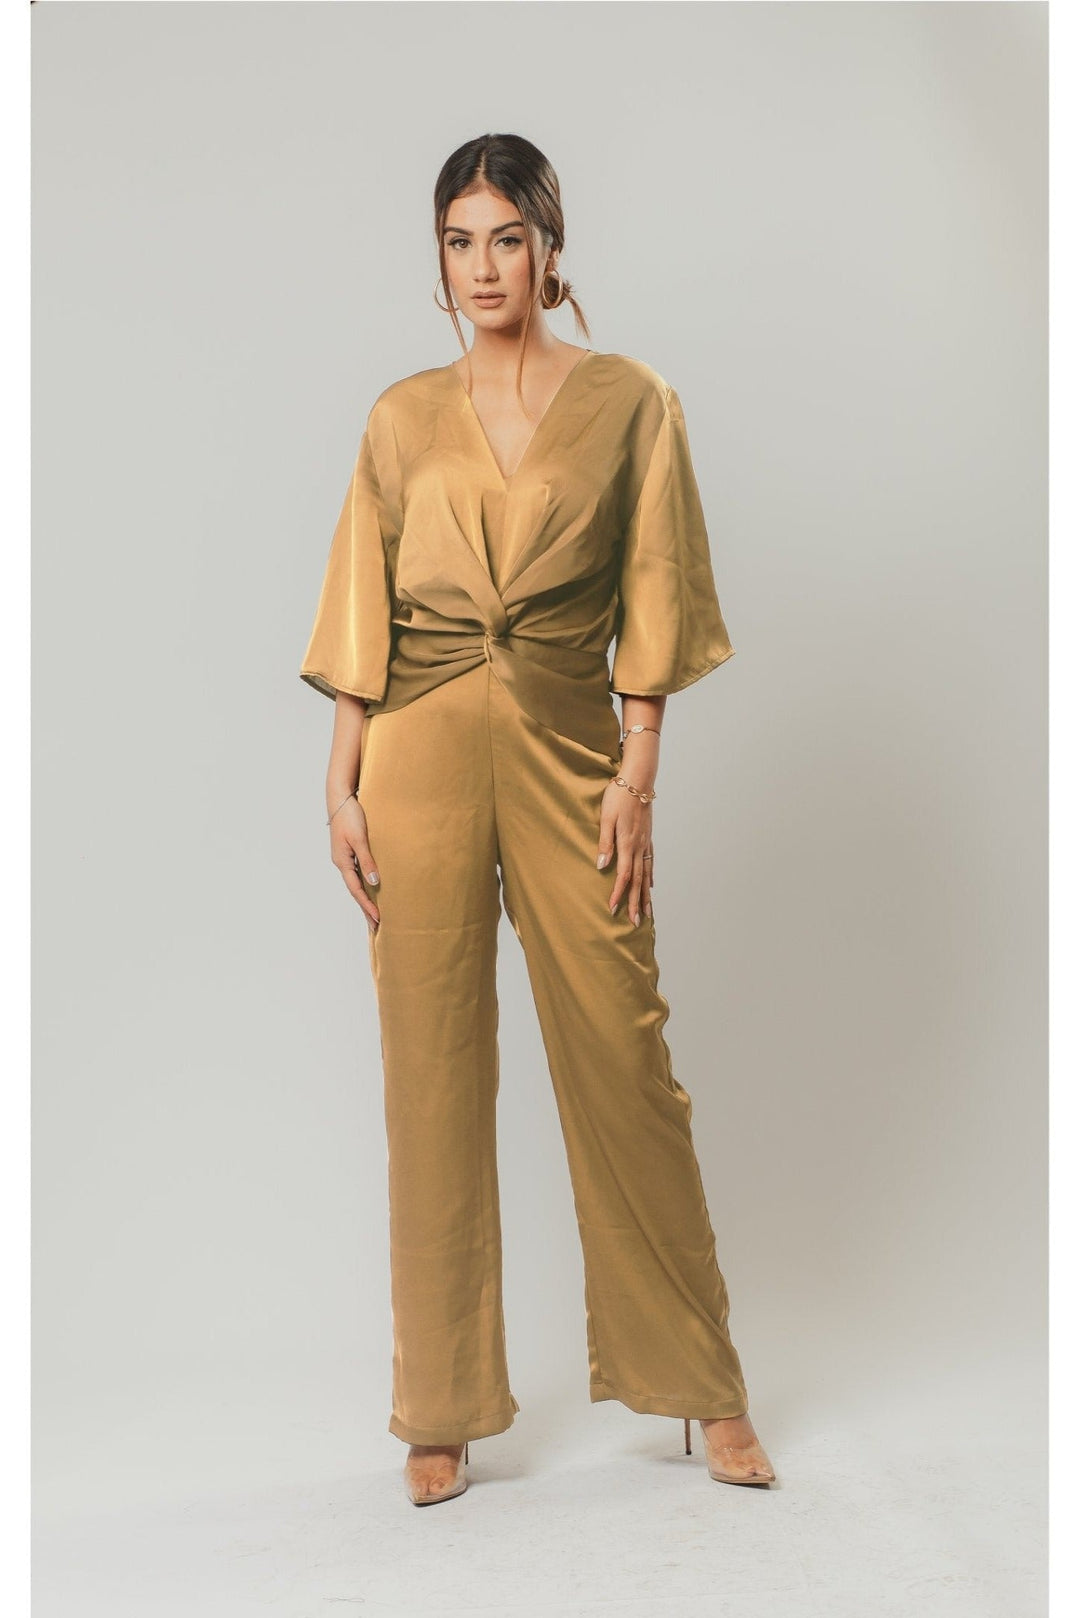 The Eve Jumpsuit In Walnut Brown Nolabels.in